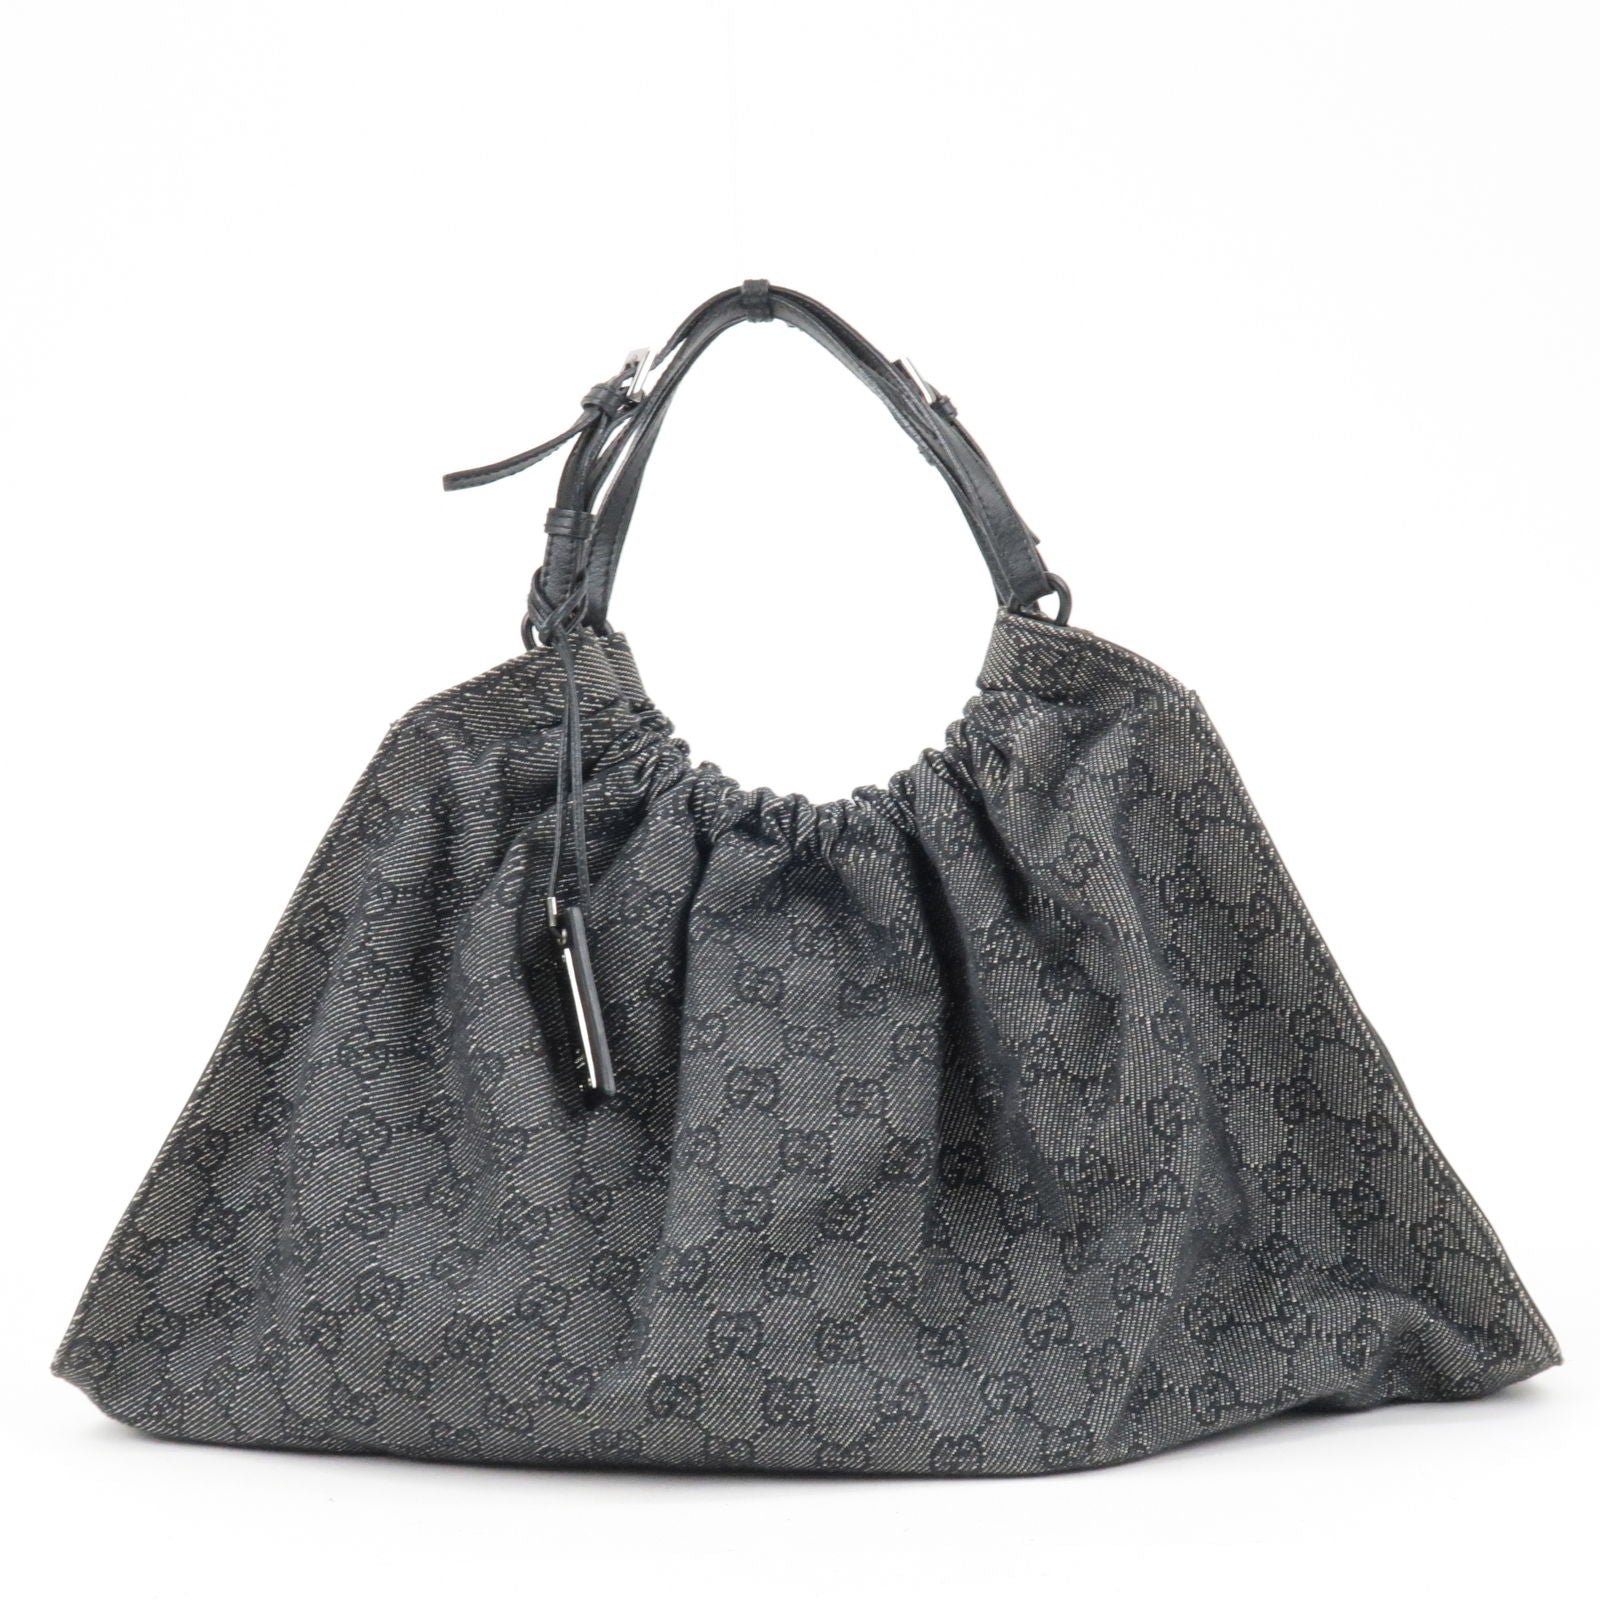 GUCCI-GG-Canvas-Leather-Hand-Bag-Purse-Black-76554 – dct 